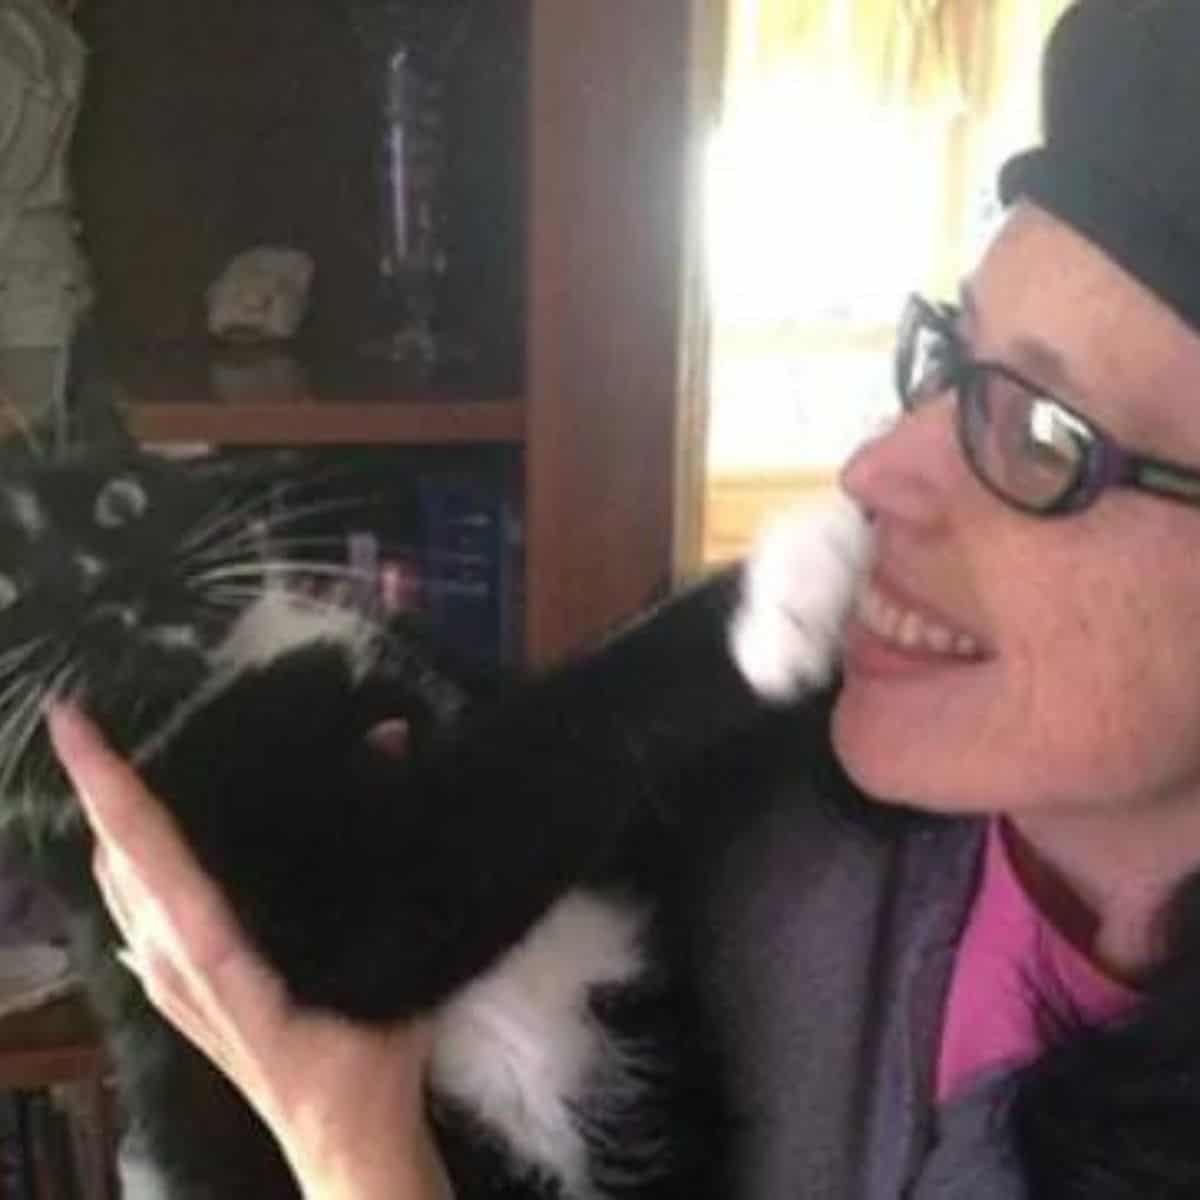 the cat defends itself from the woman with its paw